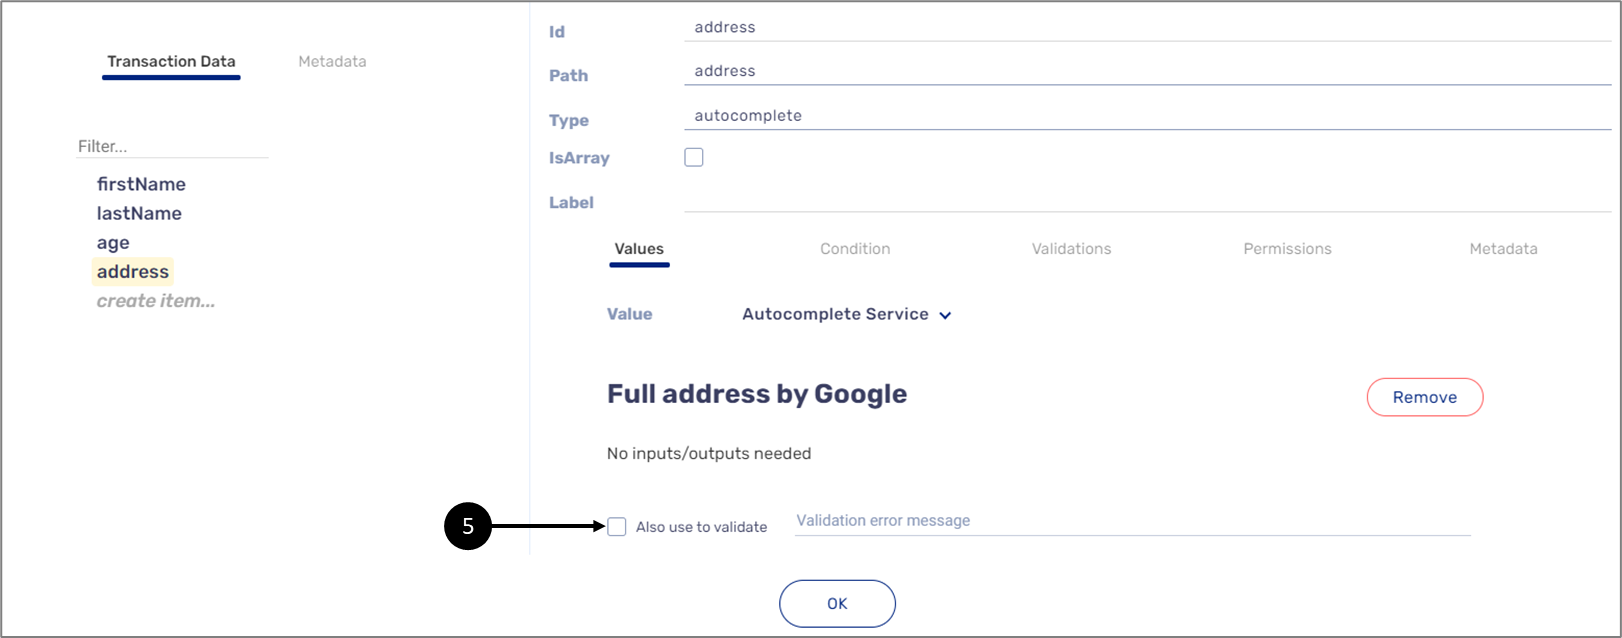 After adding the service, there is a possibility to use the autocomplete to validate (5) the input information, forcing the end-user to use the autocomplete and not input information manually.